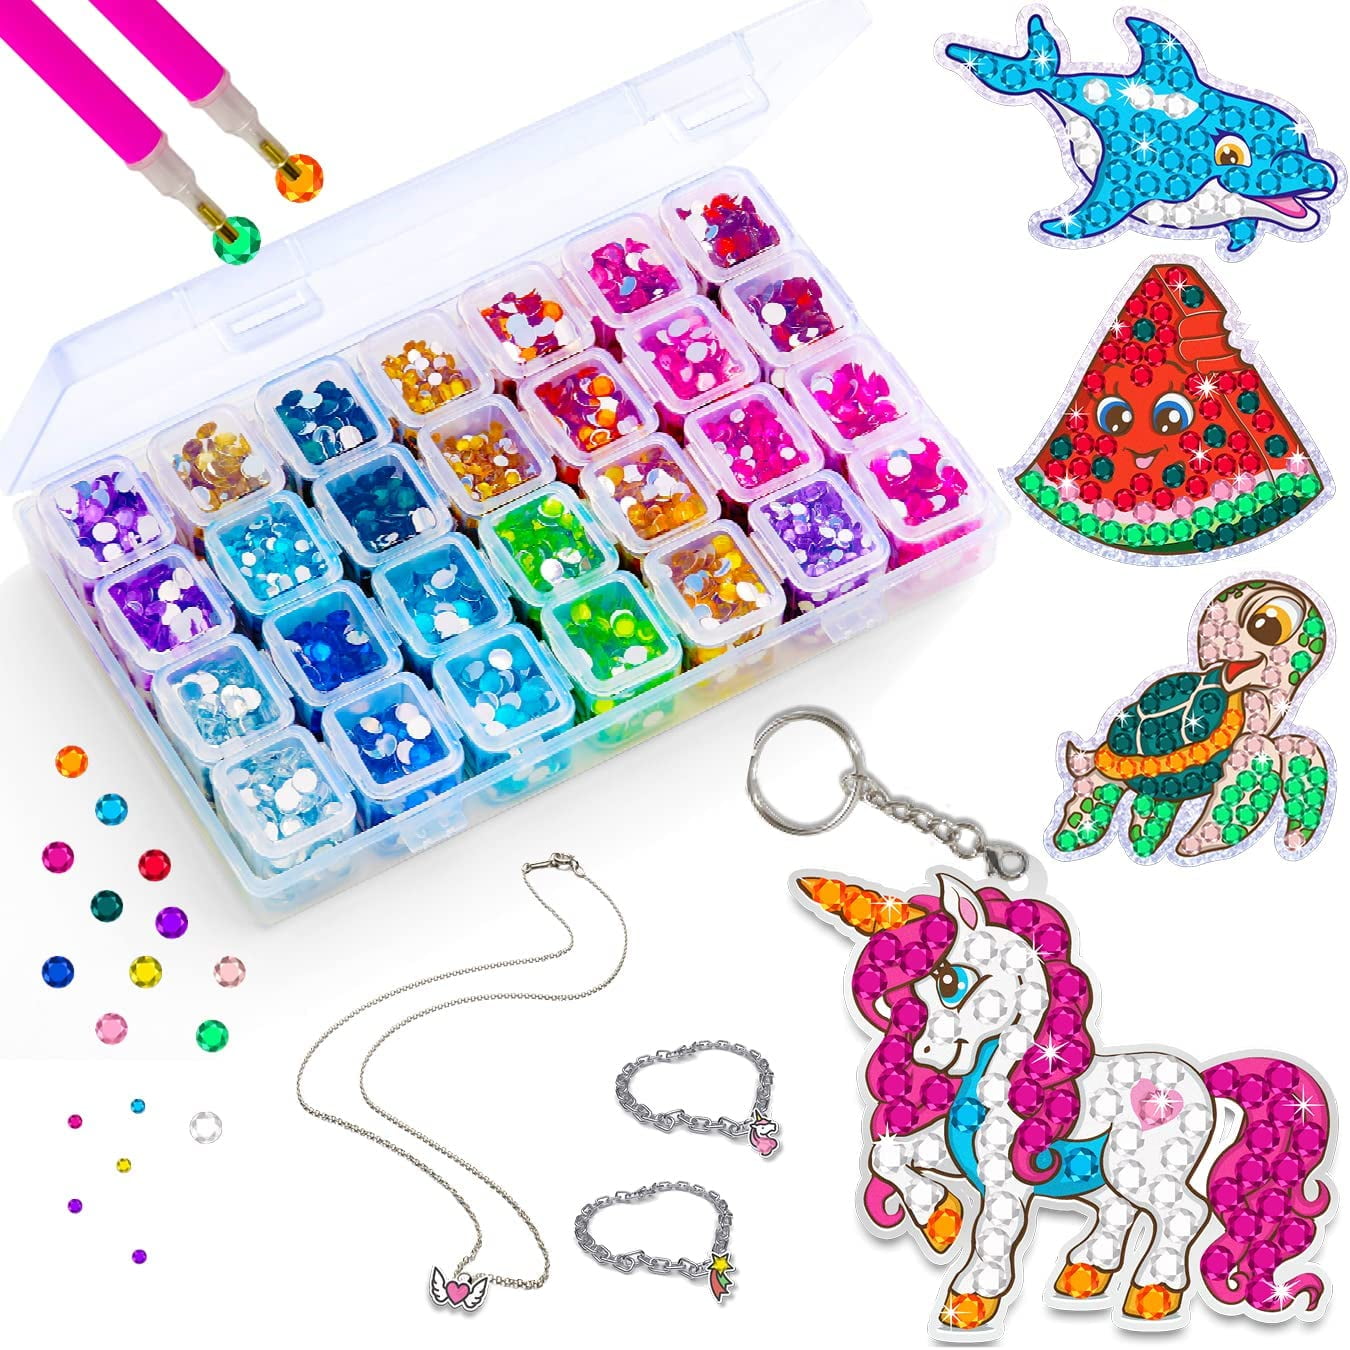  GWAHSA Arts and Crafts for Kids Ages 8-12 DIY Wooden Jewelry  Making Kit Toys for Girls Ages 6-8 8-13 Jewelry Art Supplies with Gem  Diamonds Birthday Gifts Party Favors Christmas Stocking Stuffers